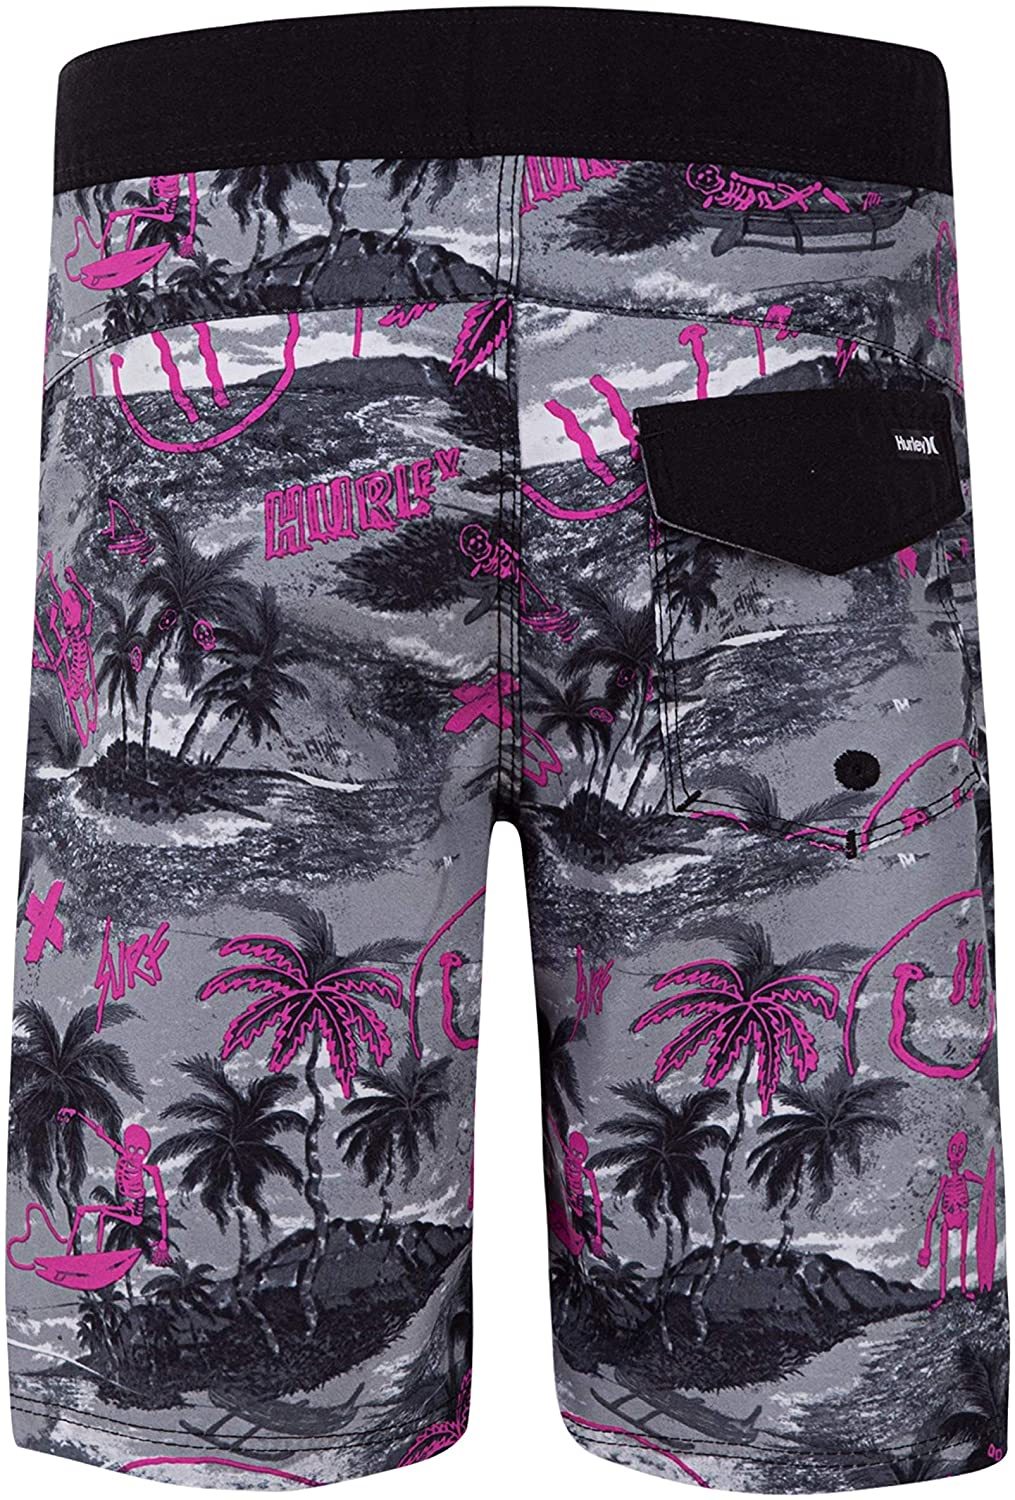 Hurley Boys S/S Redwing Logo Printed Short Size 4 5 6 $28.00 